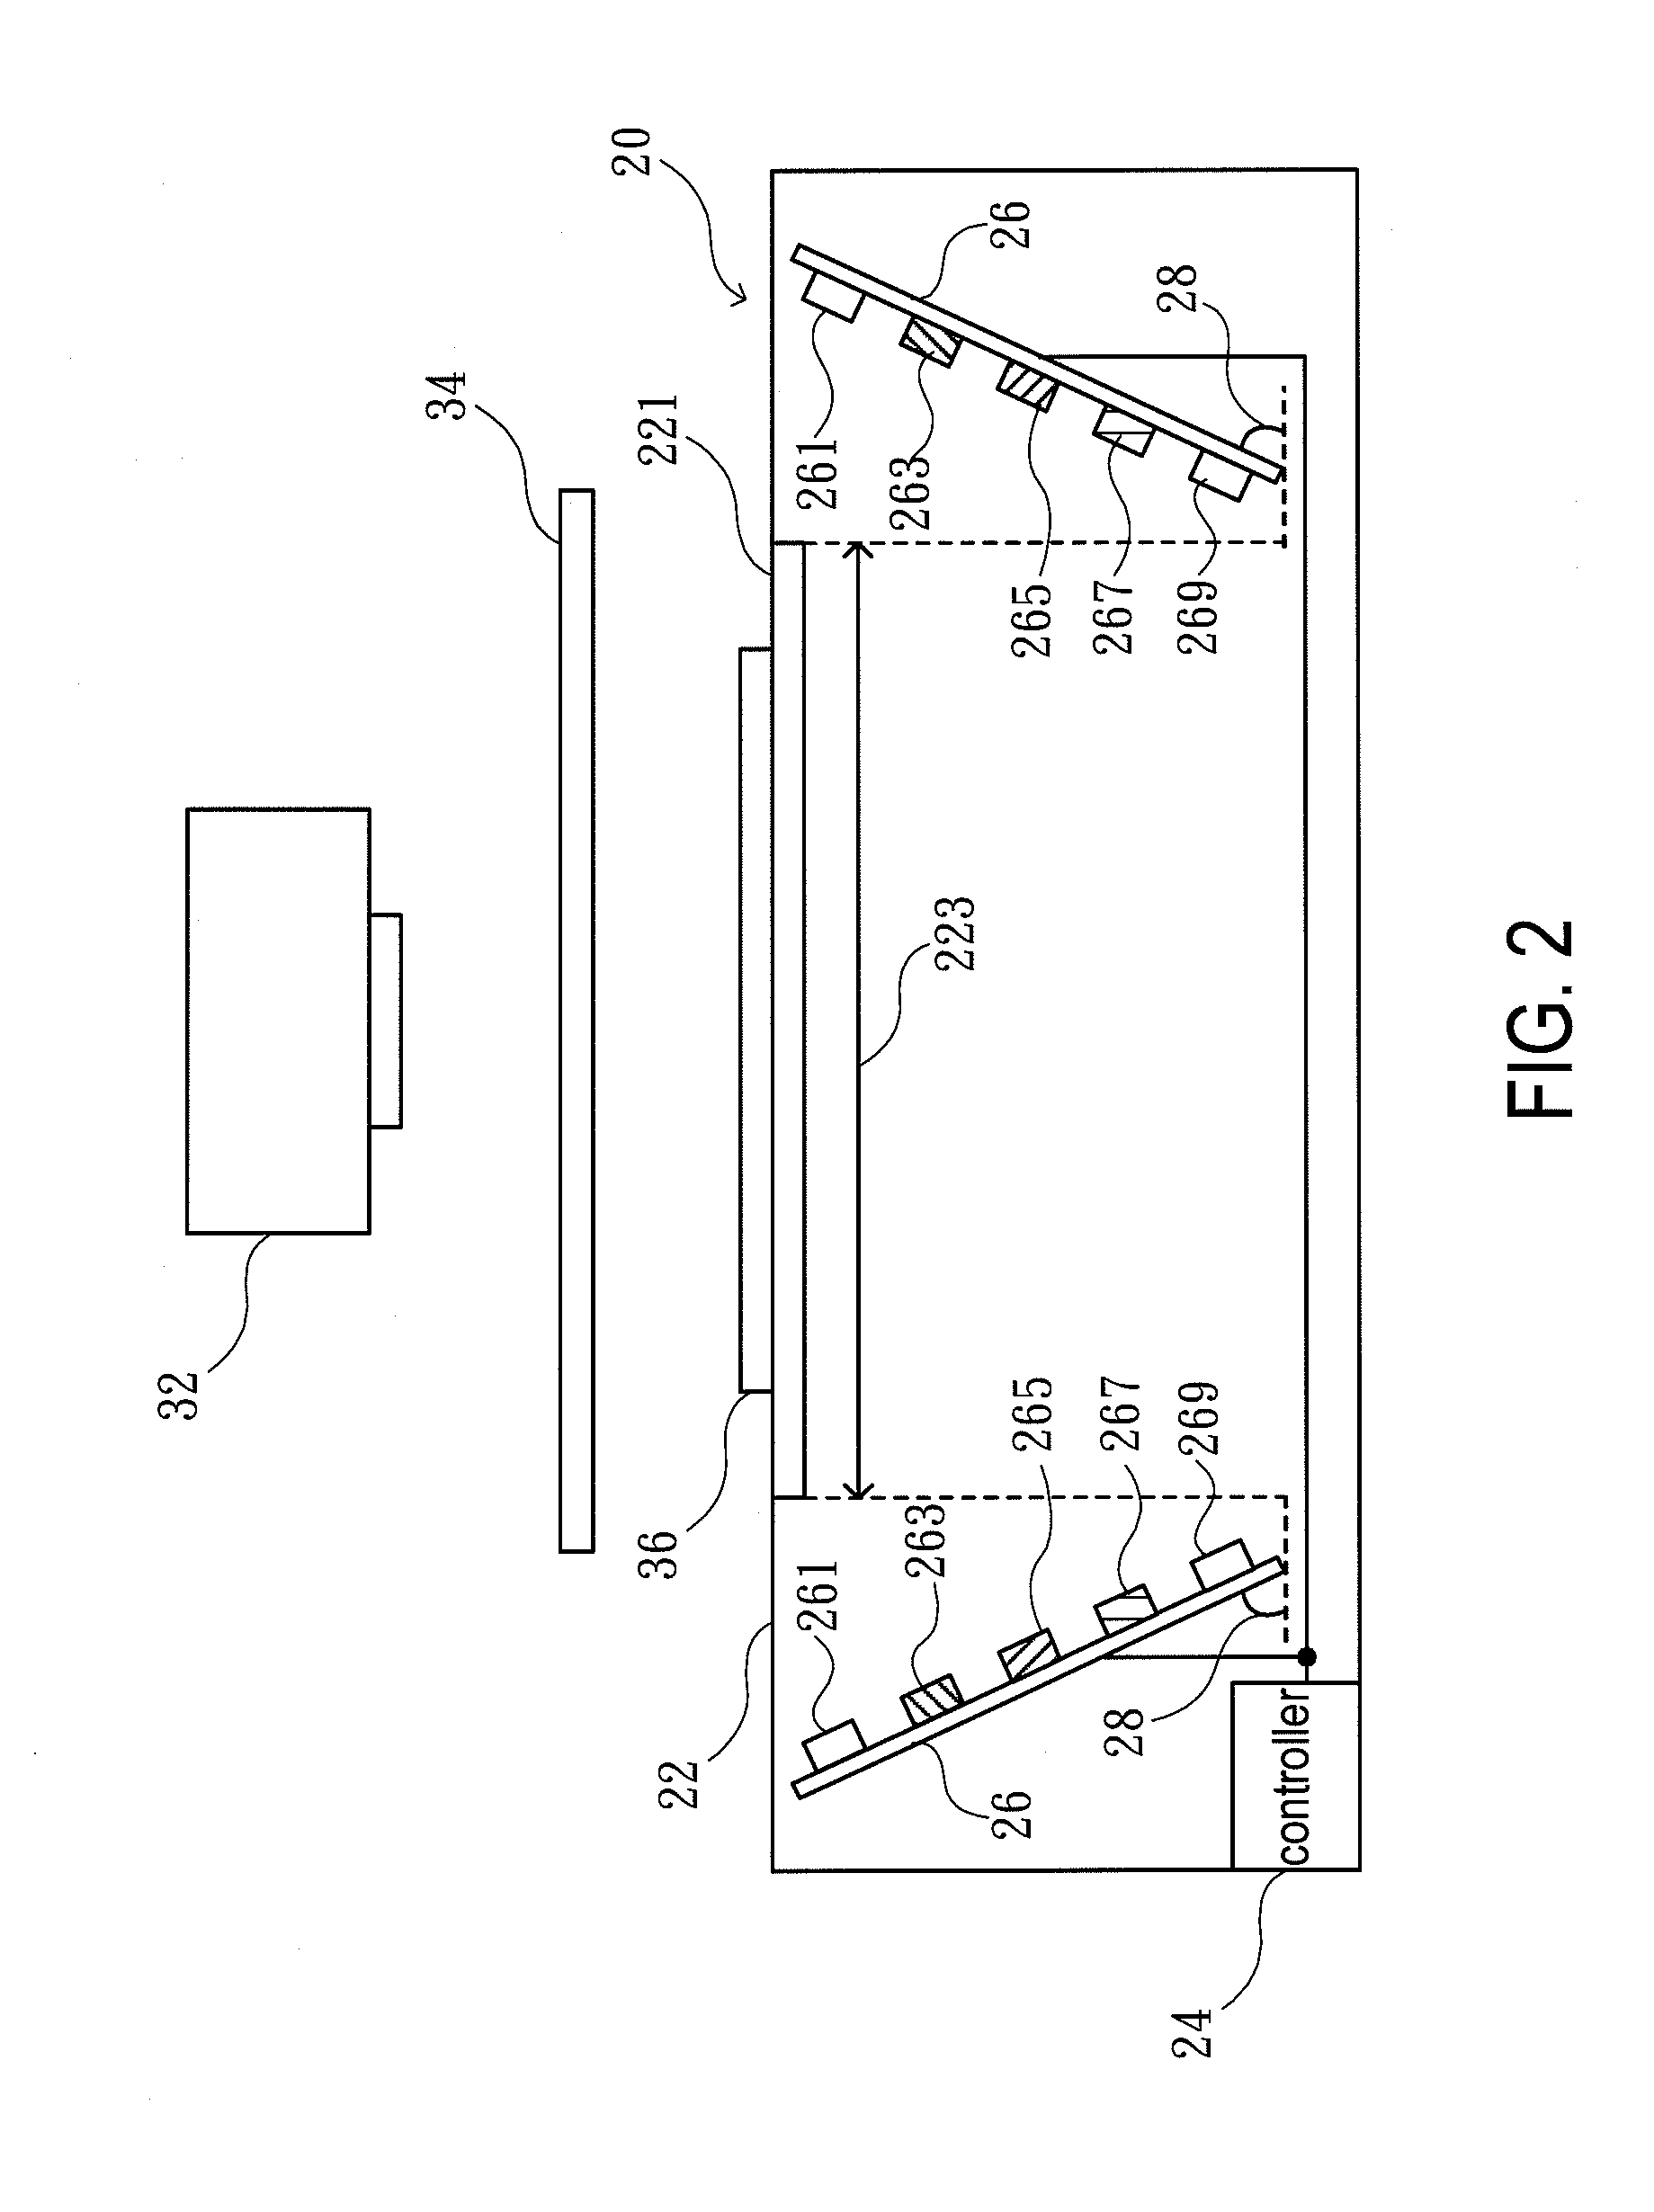 Light source apparatus for fluorescence photography